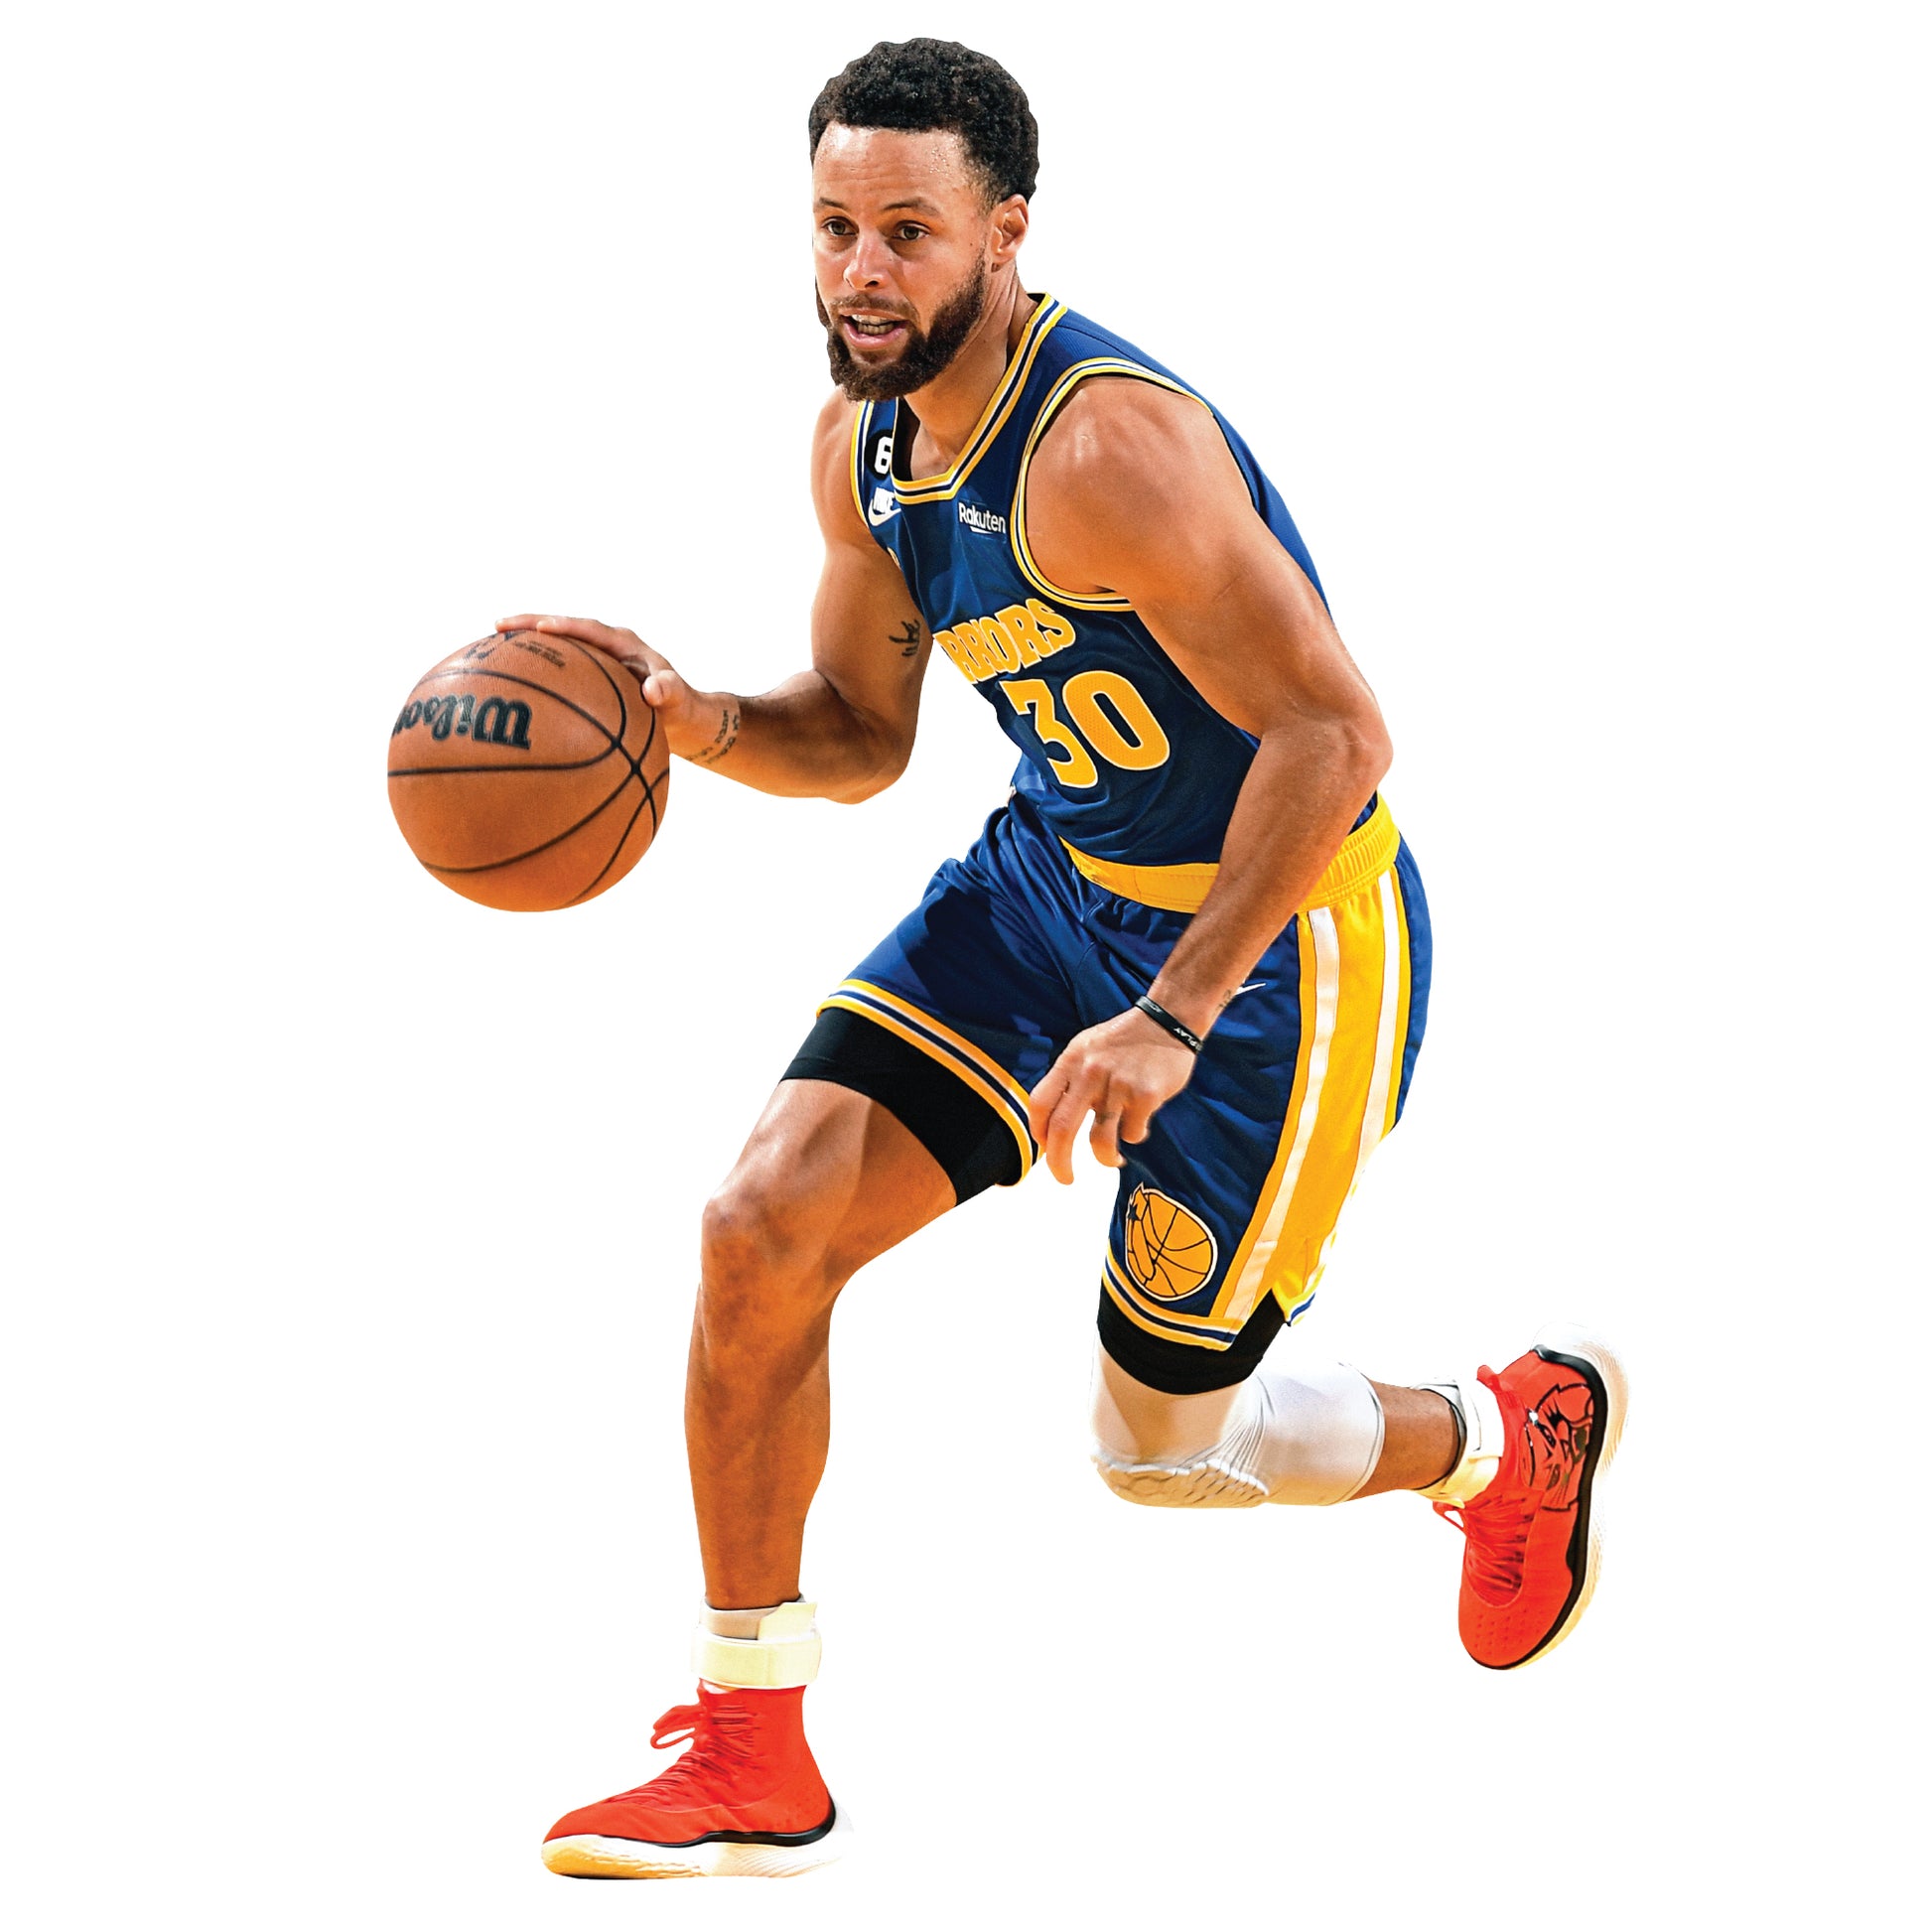 Golden State Warriors: Stephen Curry 2021 Classic Jersey - NBA Removable Adhesive Wall Decal Life-Size Athlete +11 Wall Decals 45W x 75H